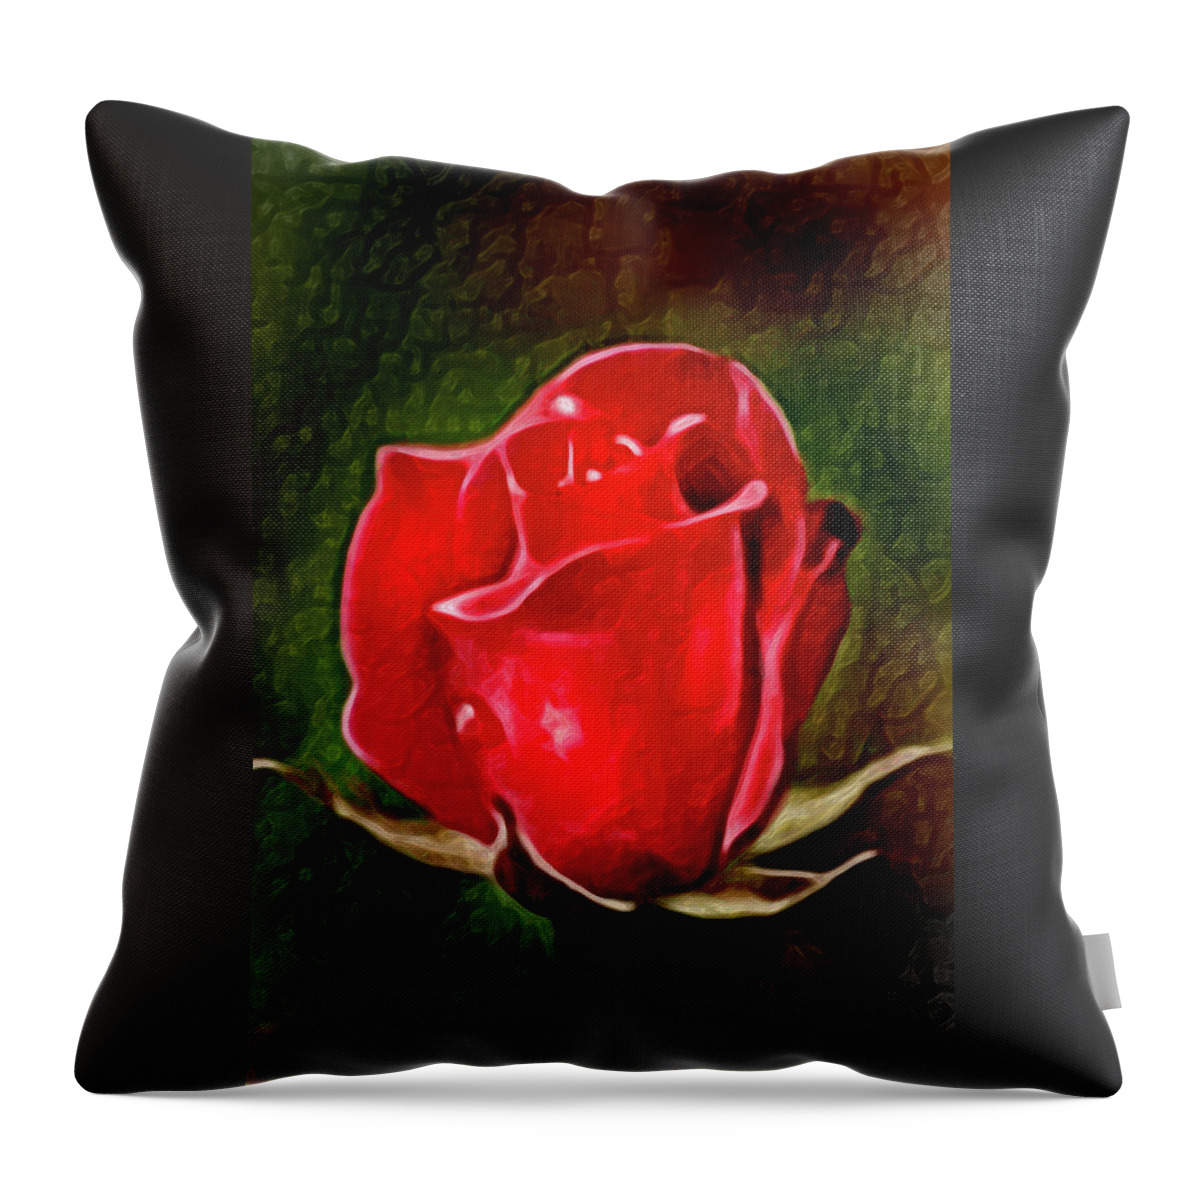 Flower Throw Pillow featuring the photograph Lovely Artistic 2 Red Rose by Don Johnson